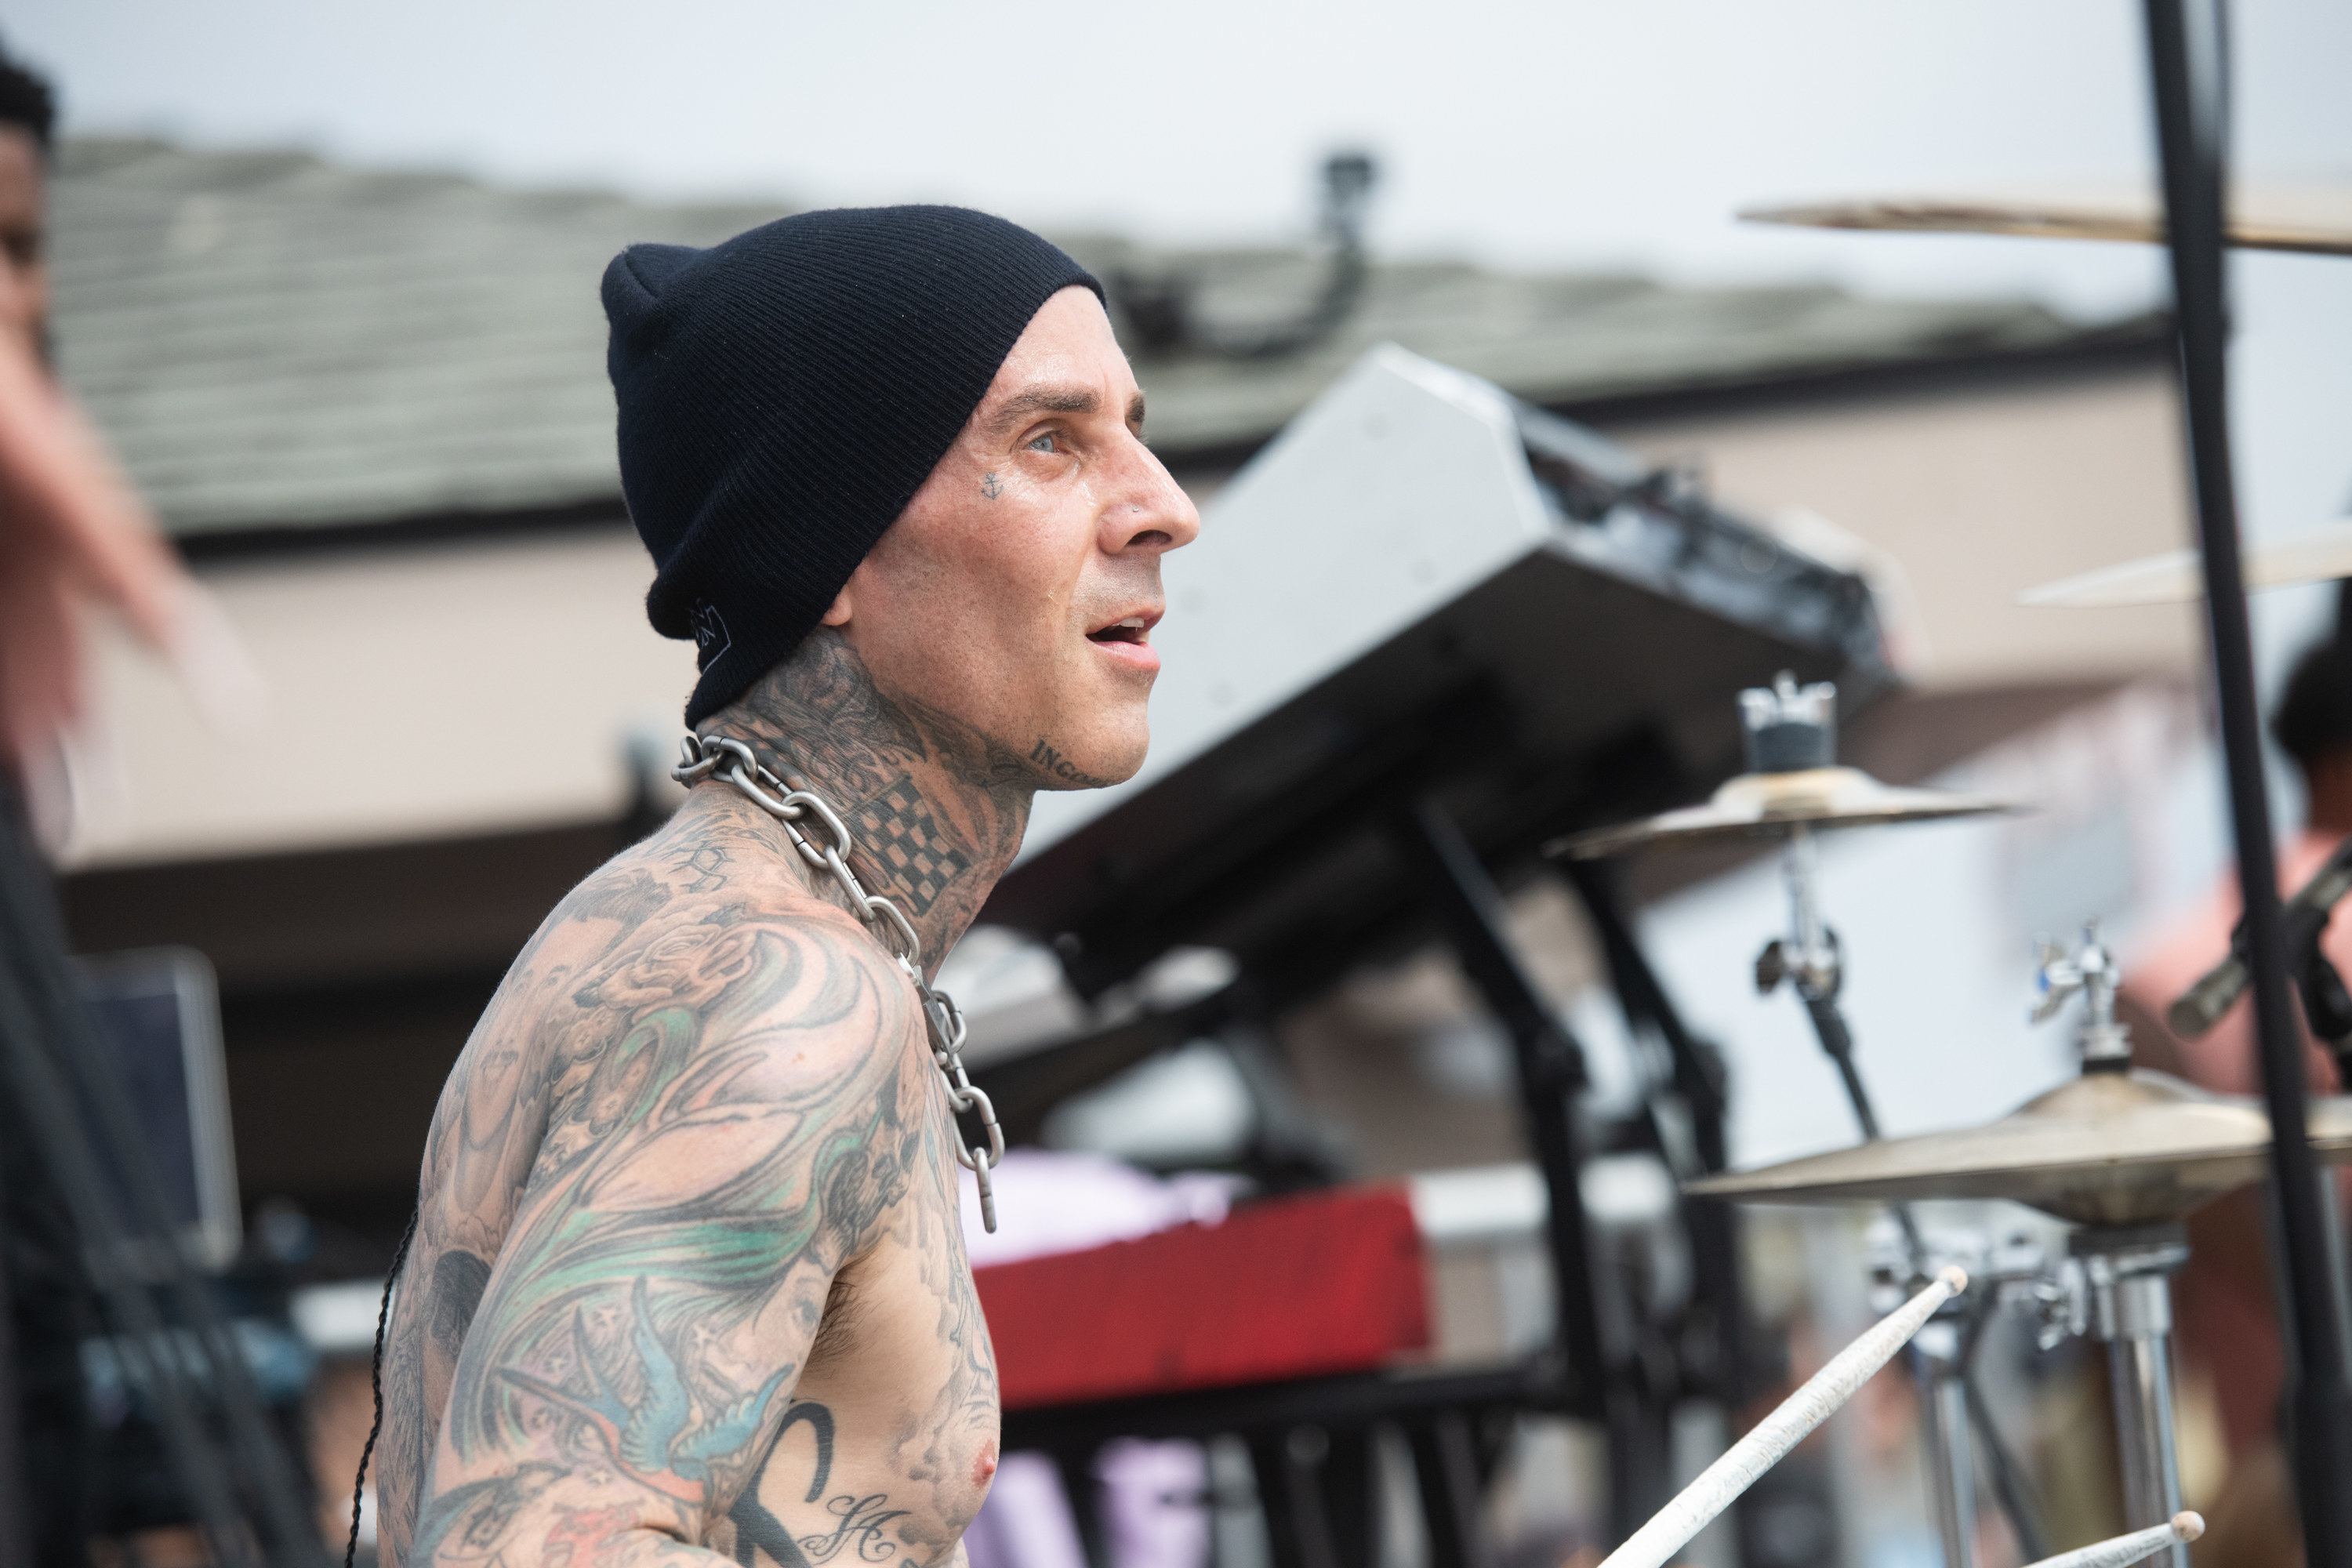 Travis Barker is pictured drumming onstage in Venice, California